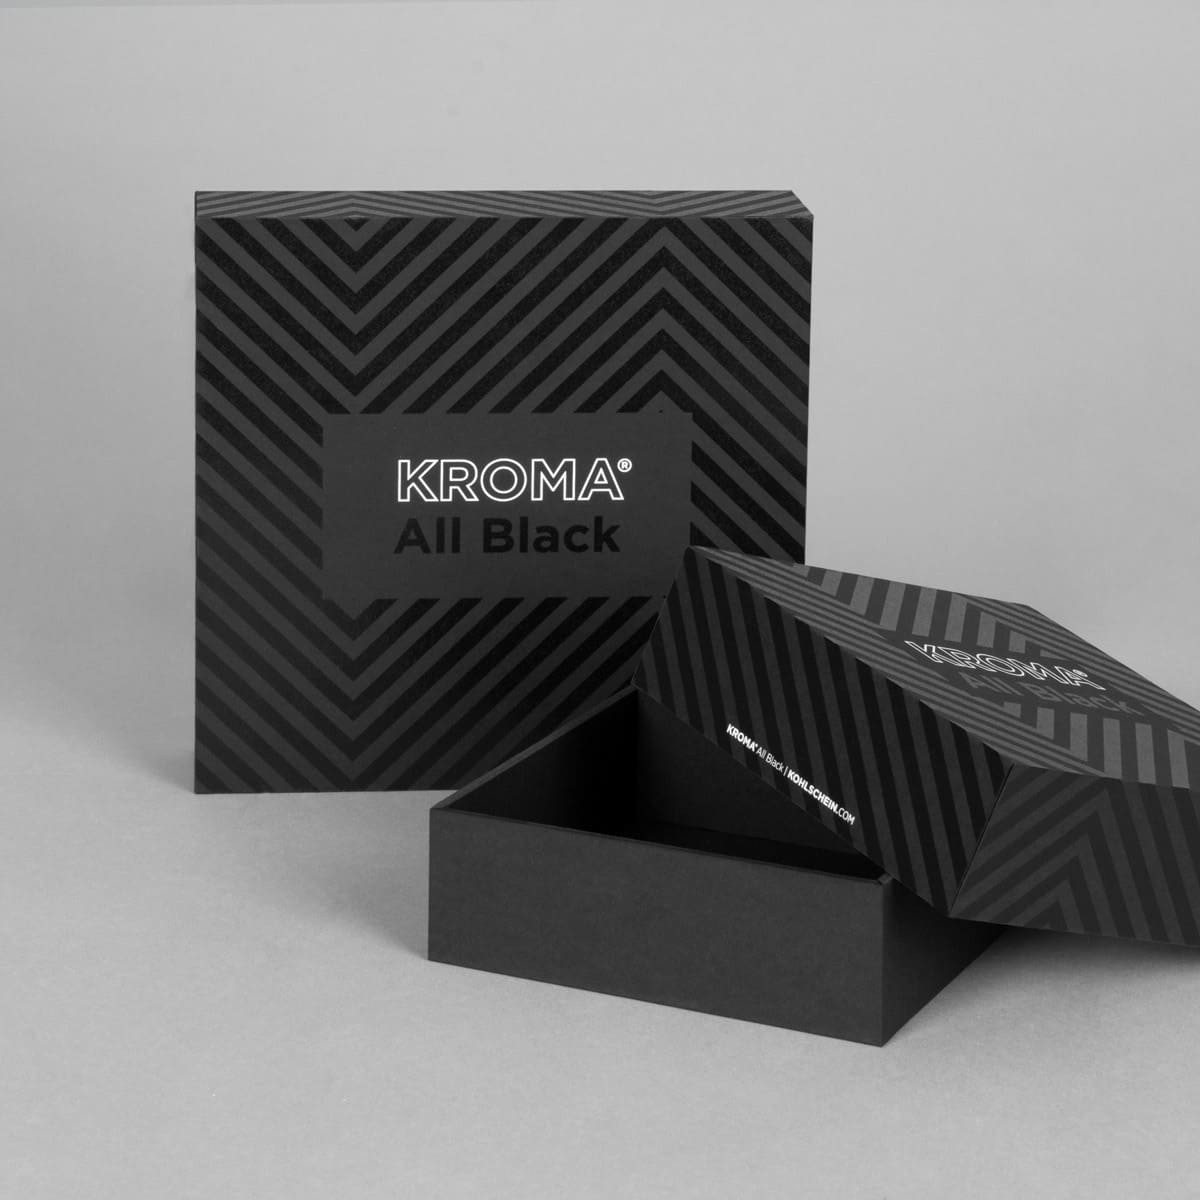 Product packaging boxes made of KROMA All Black